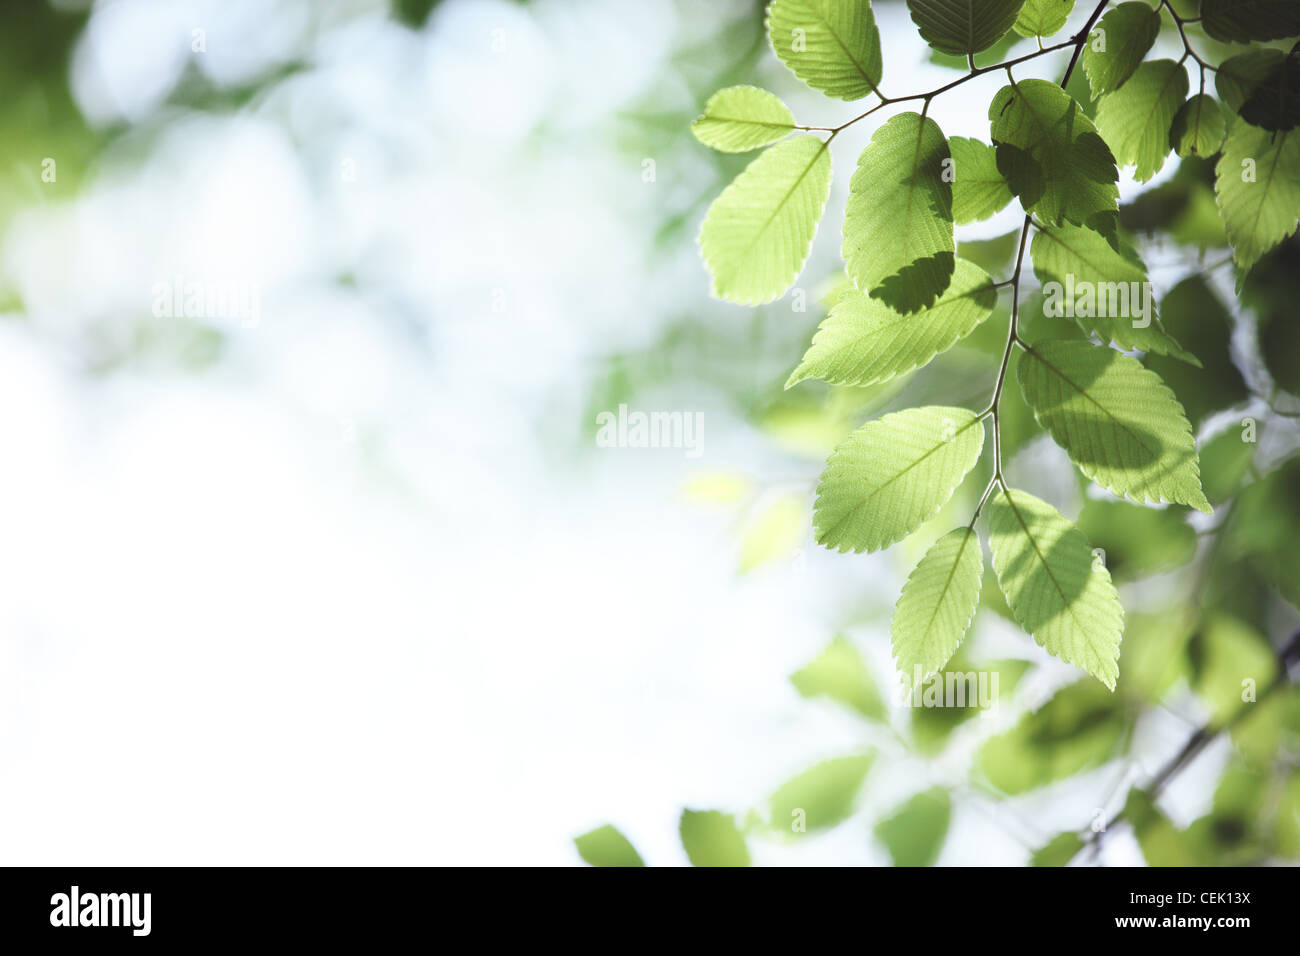 Green leaves for use as natural background. Stock Photo